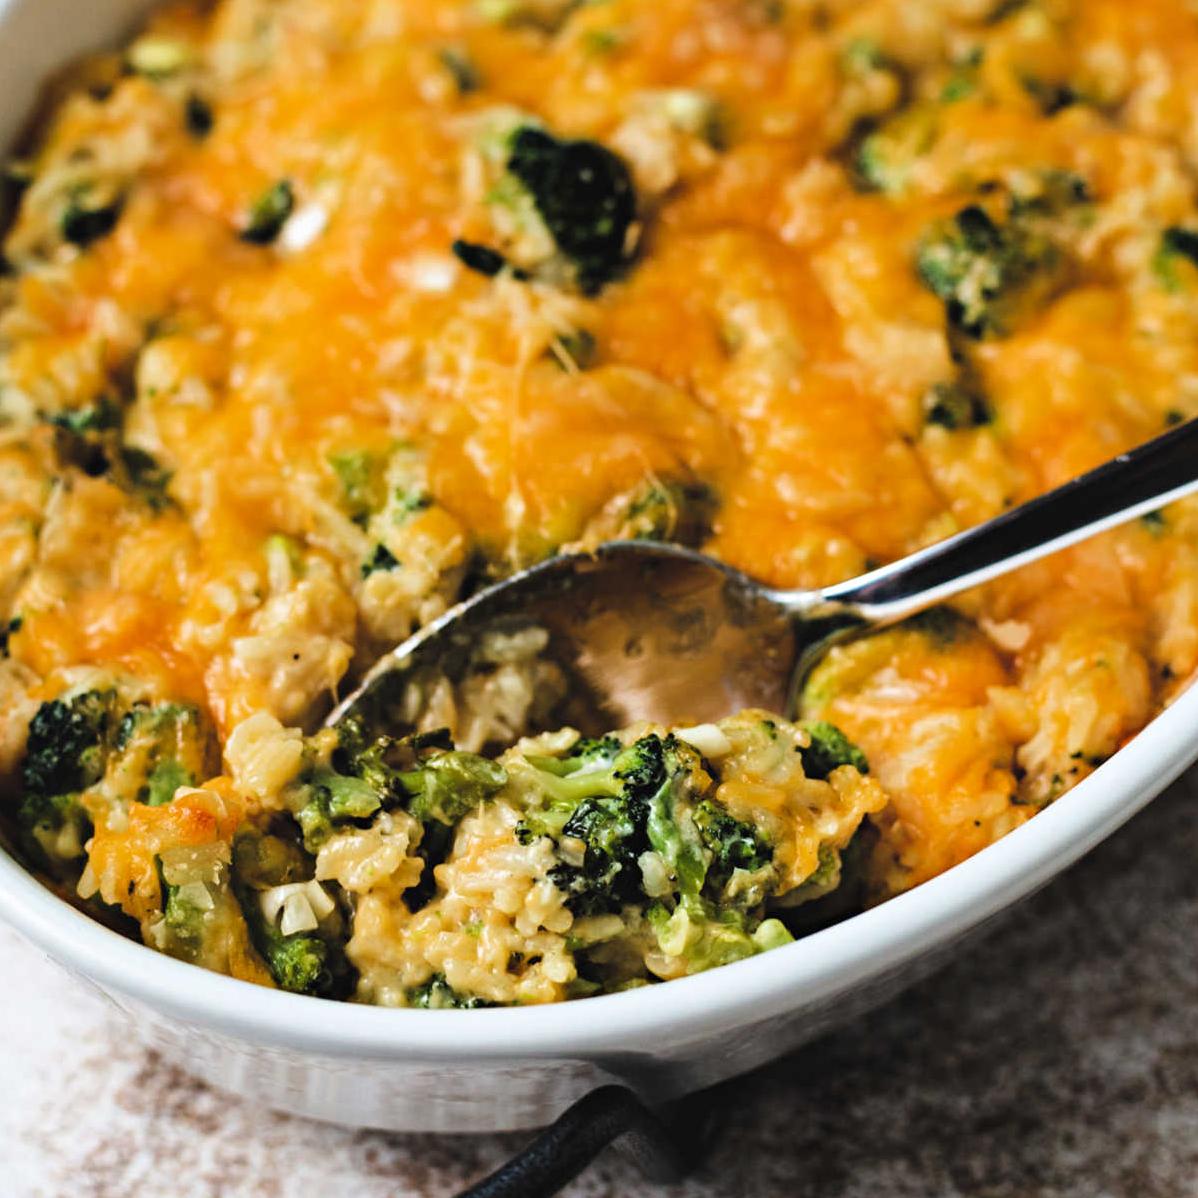  Broccoli never tasted so good! This casserole is perfect for special occasions or weeknight dinners.